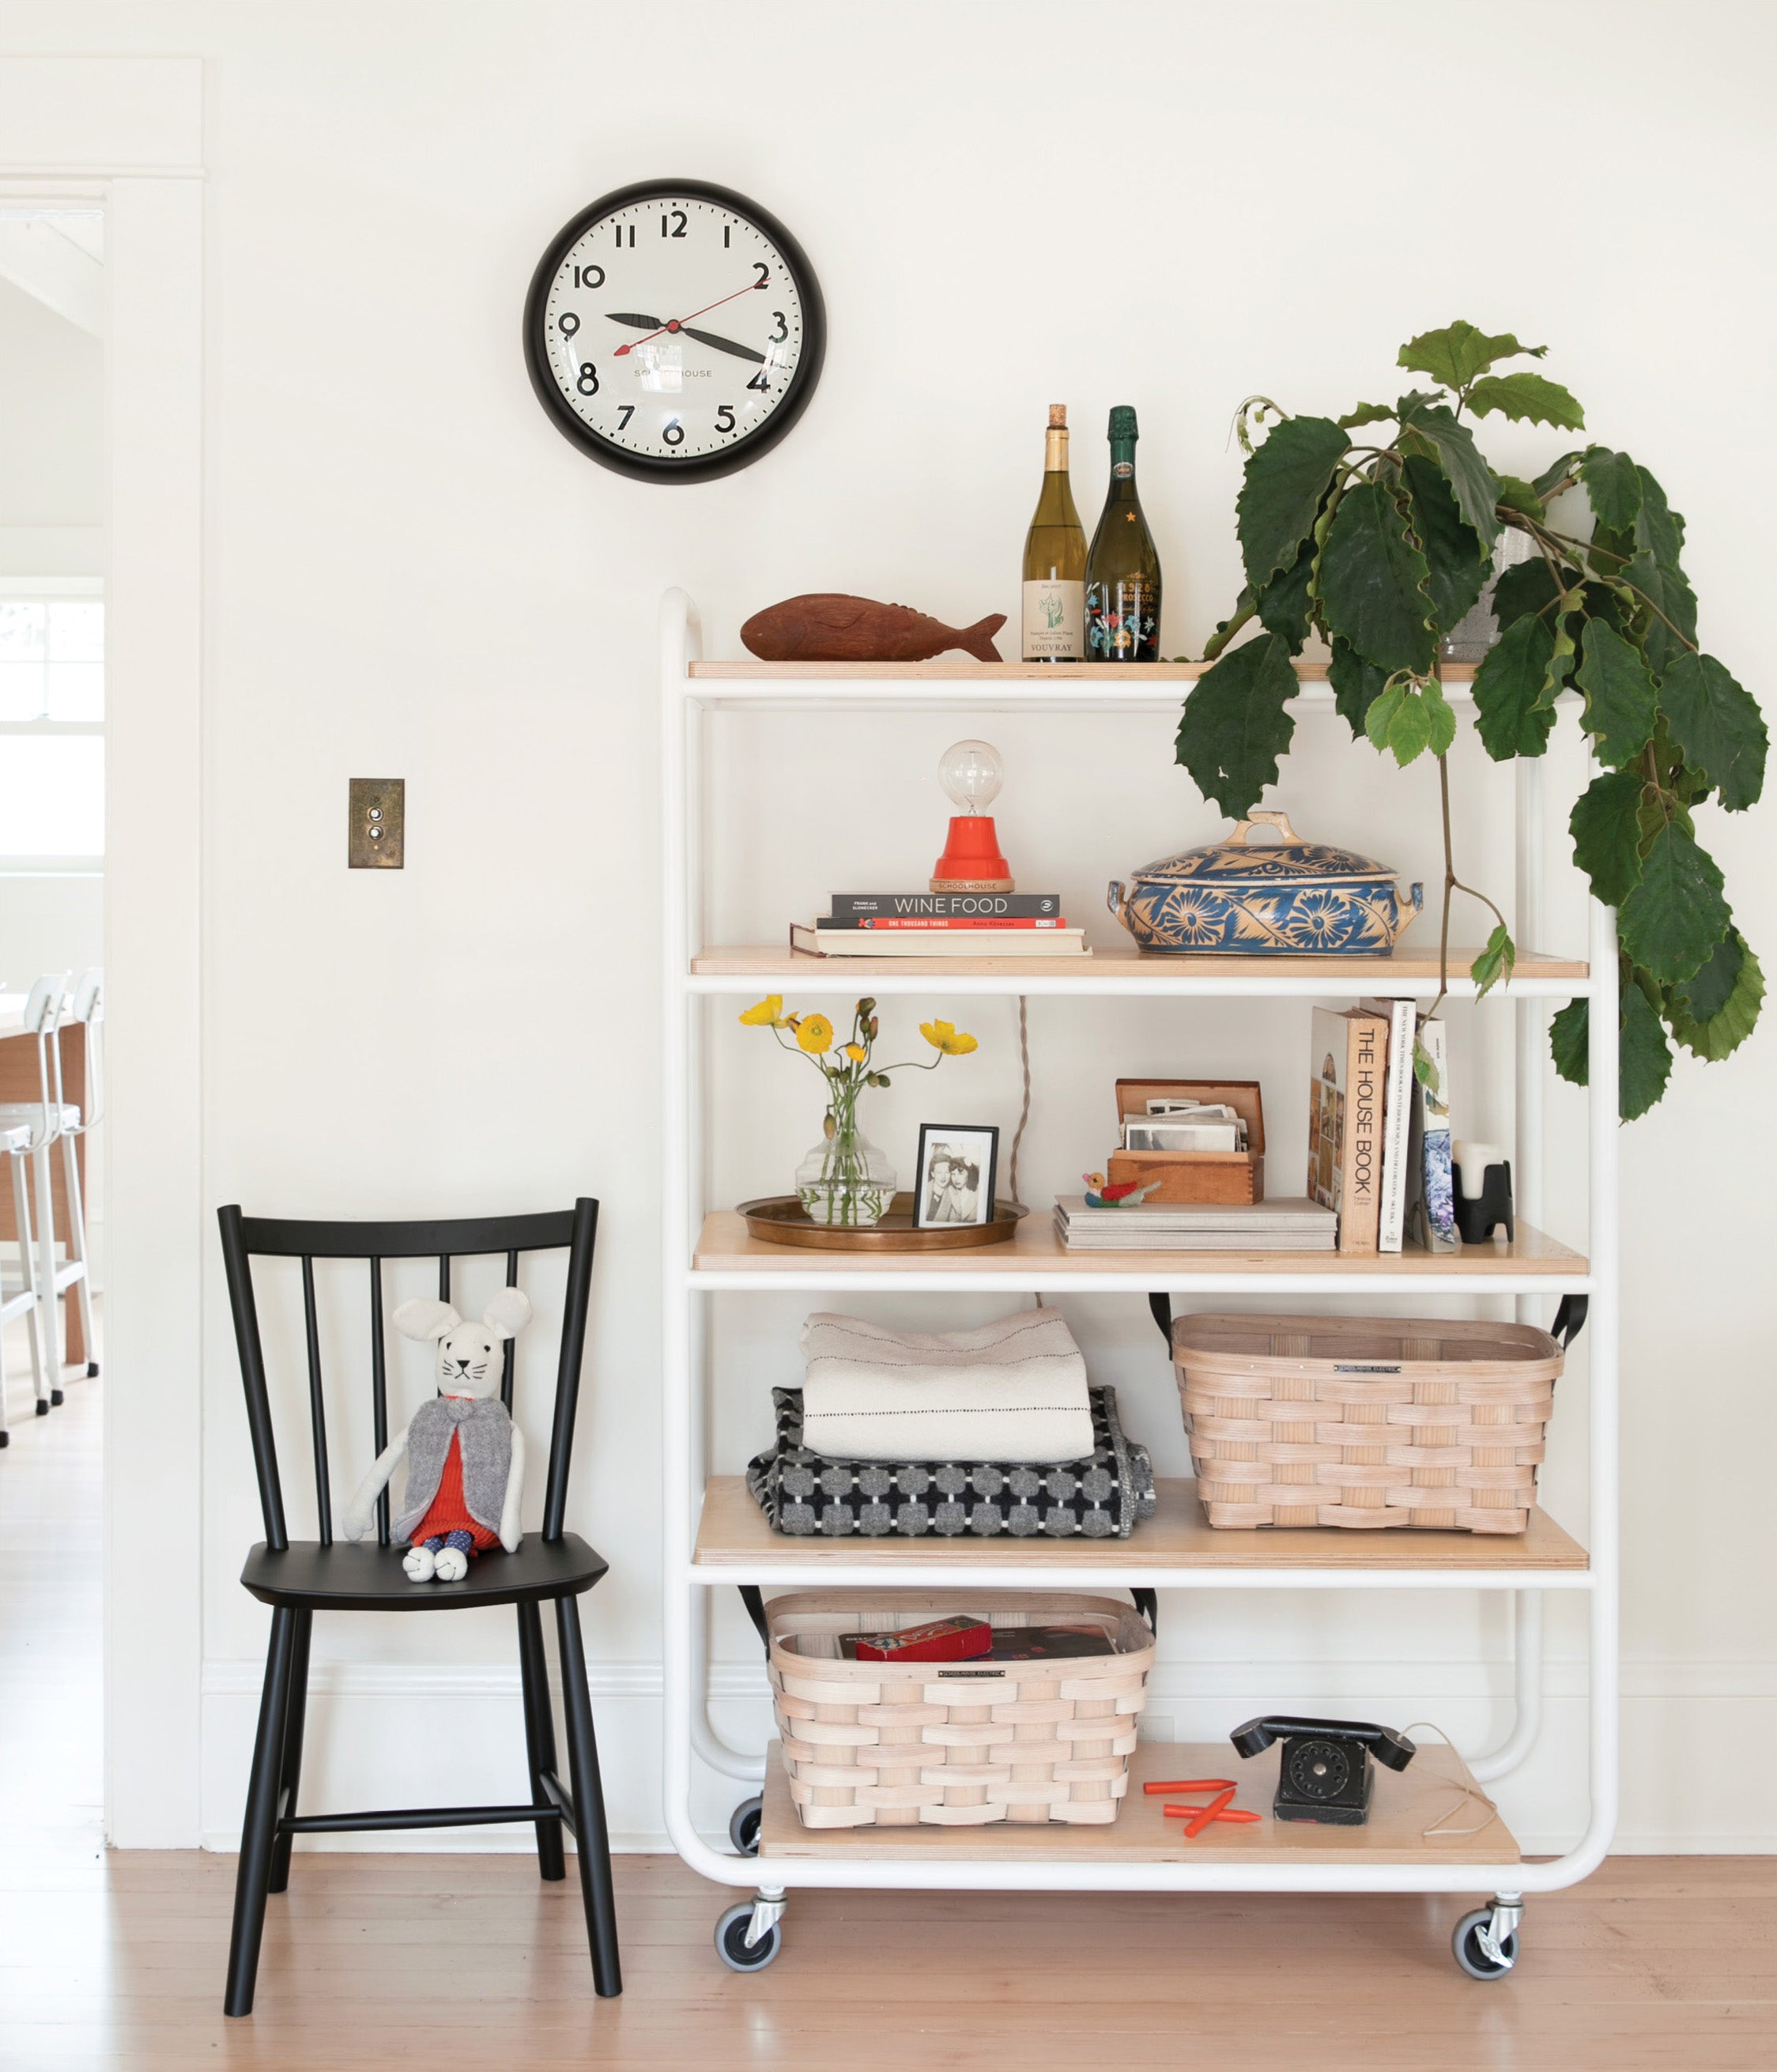 clock on a wall and a black chair and a shelving unit full of baskets and other items